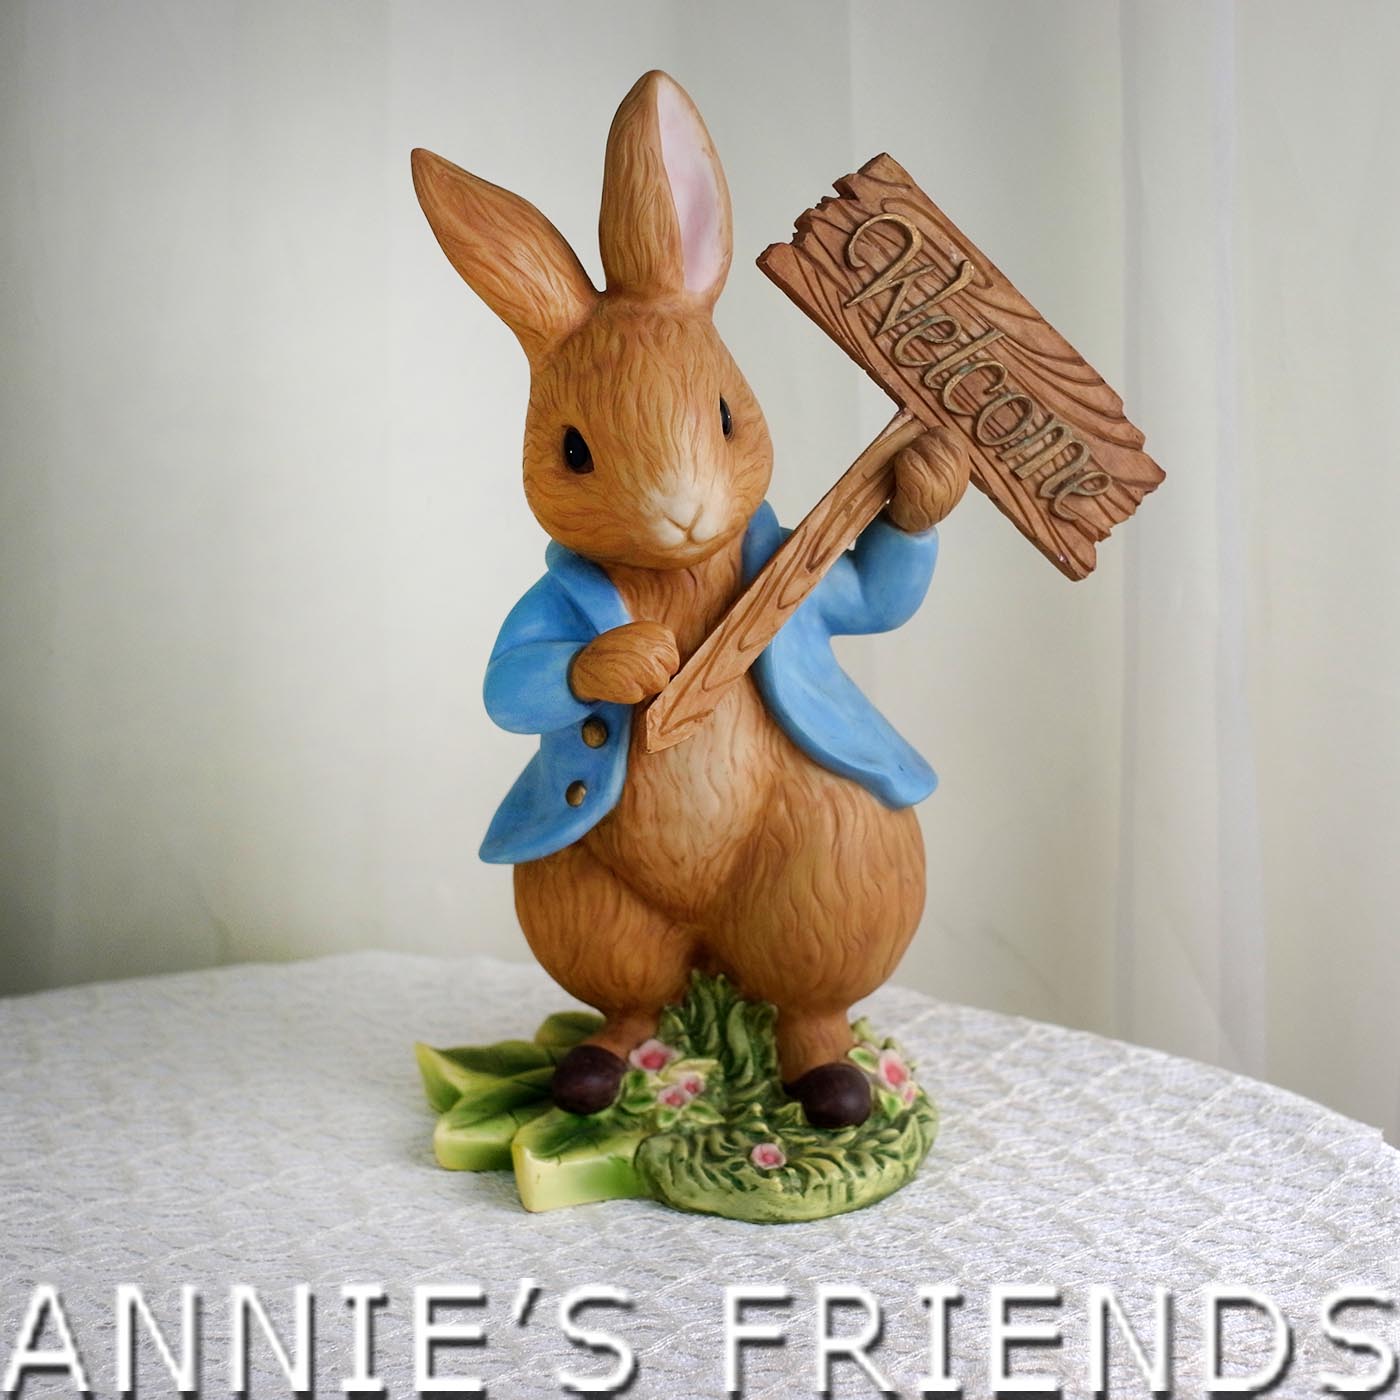 AnniesFriends 比得兔 Peter Rabbit welcome立兔存錢筒40CM 精緻 俏皮 傢飾